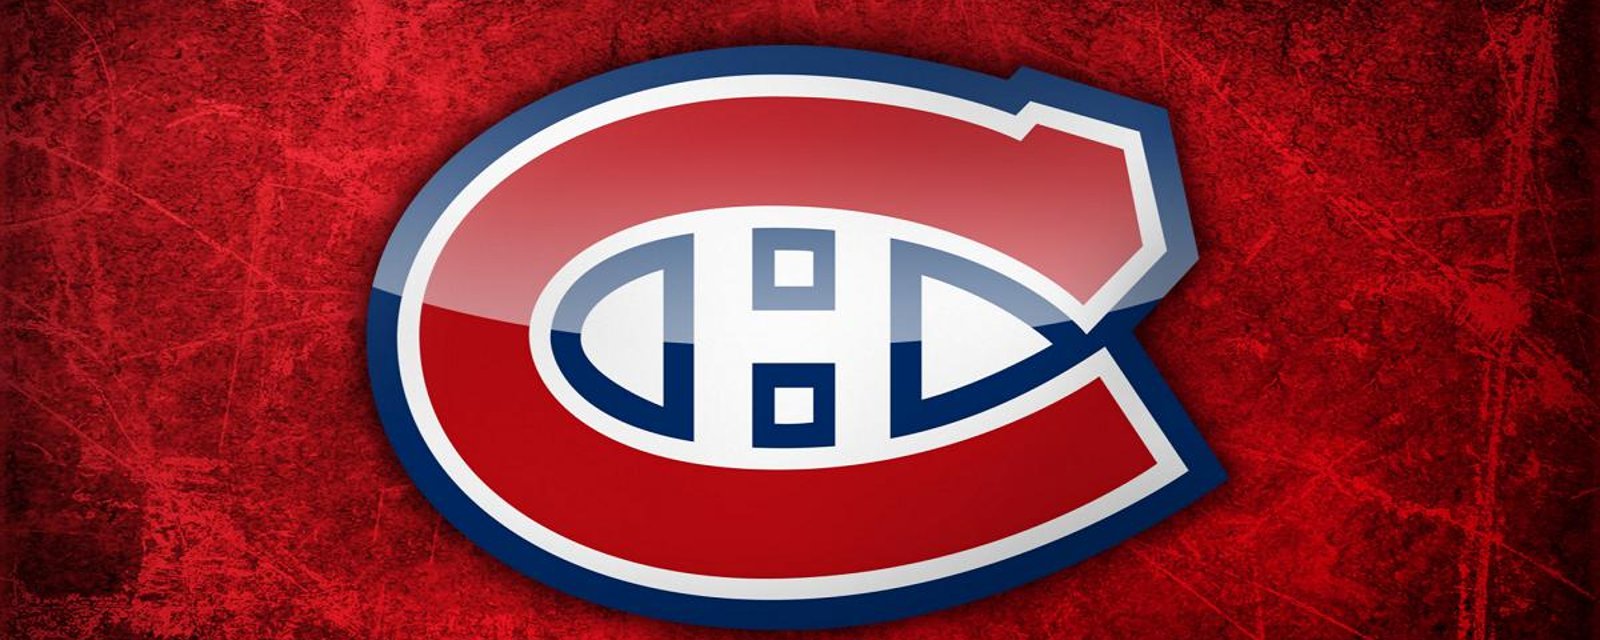 Breaking: Former Habs forward becomes the youngest player to sue NHL over head injuries.